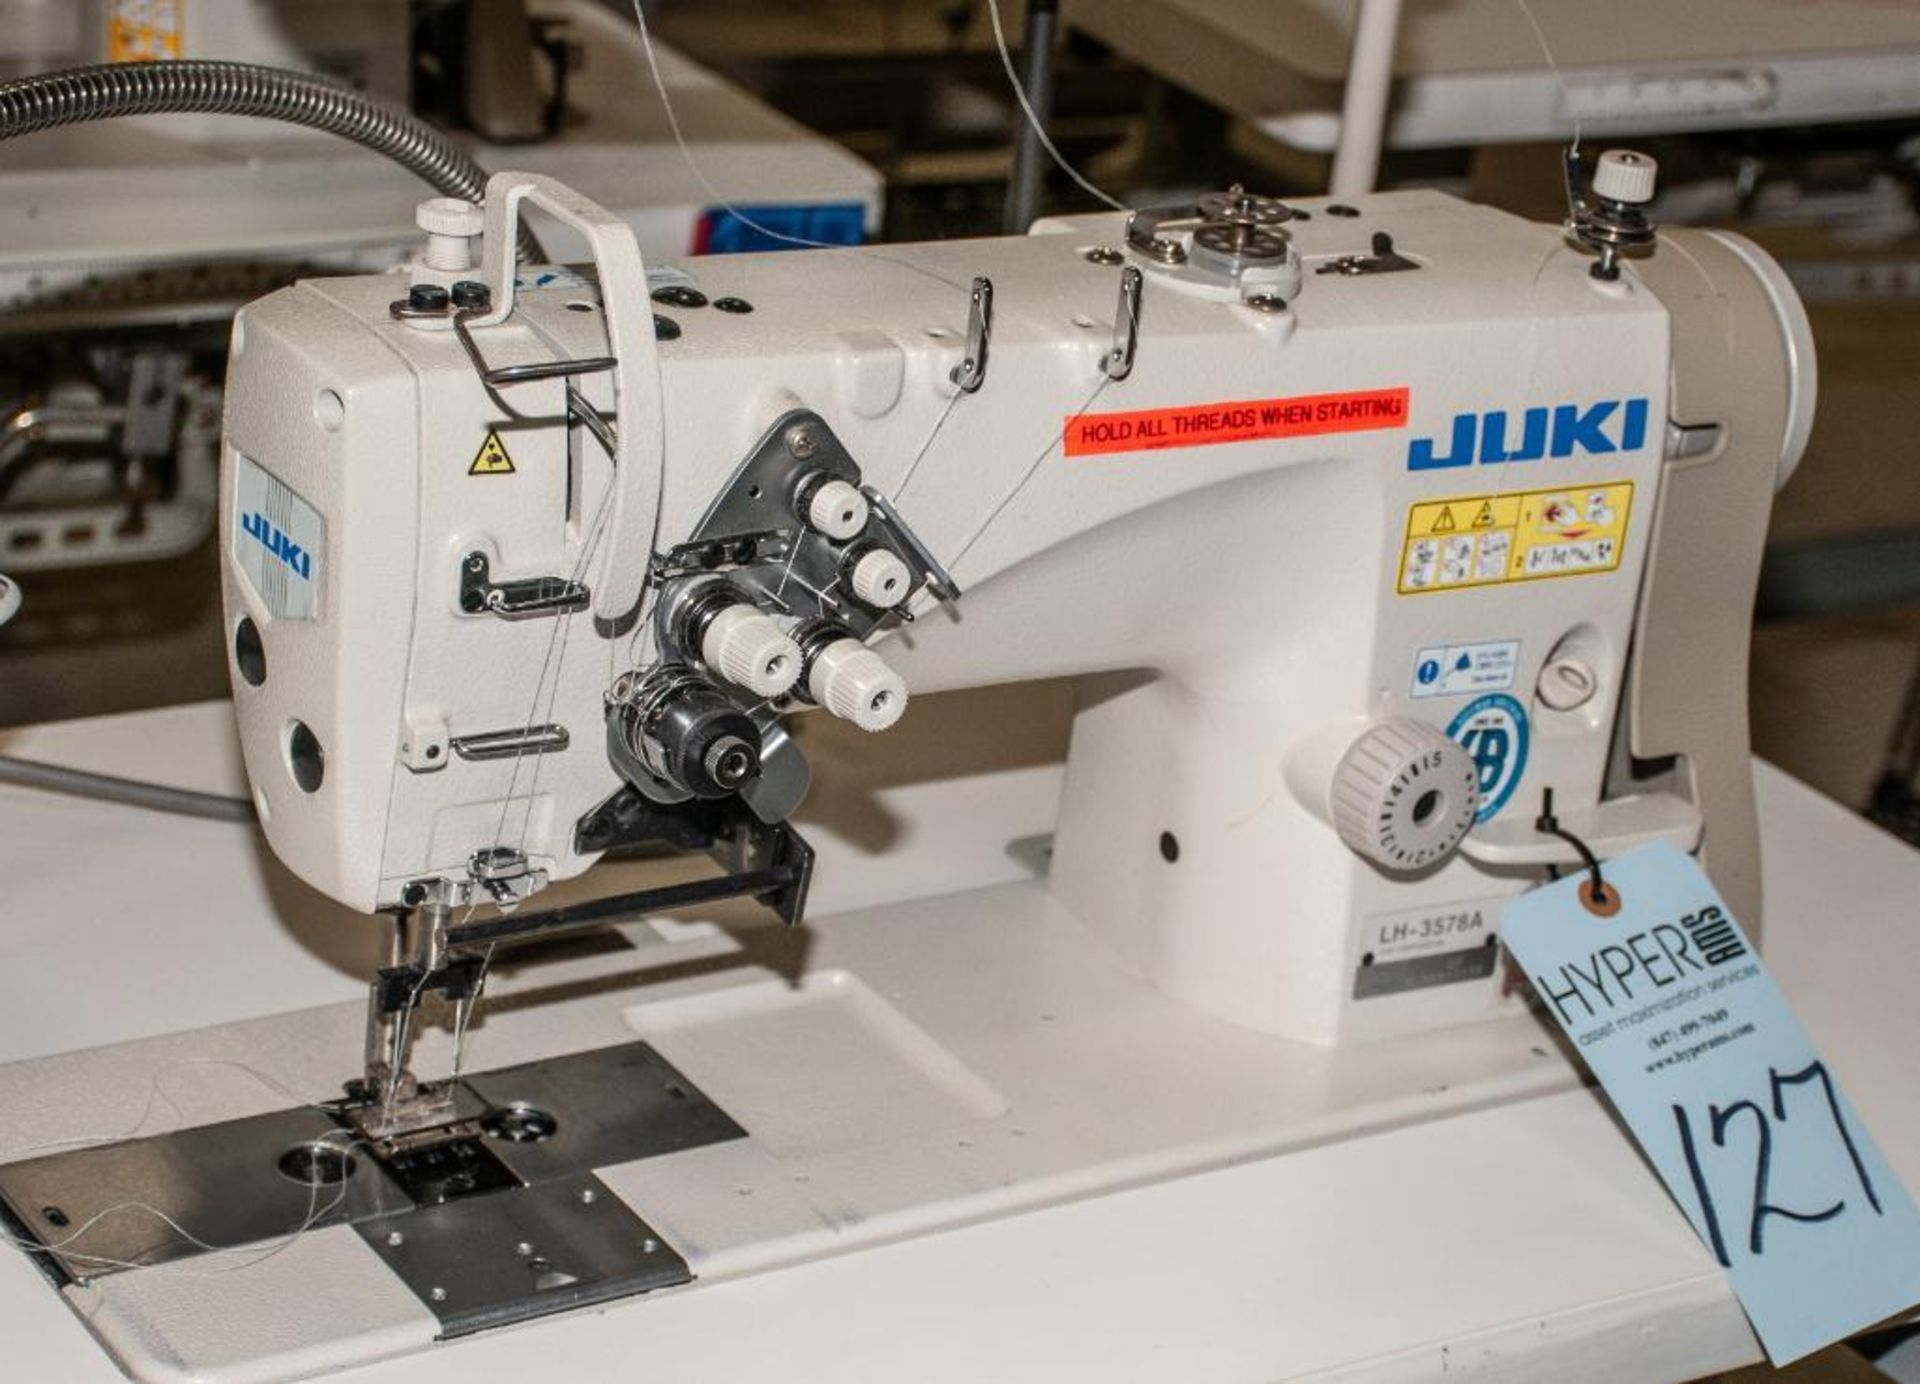 Juki LH-3578A Sewing Machine S/N: 8L3GB11139 w/ Table, 1/2-HP, 110V - Image 2 of 6